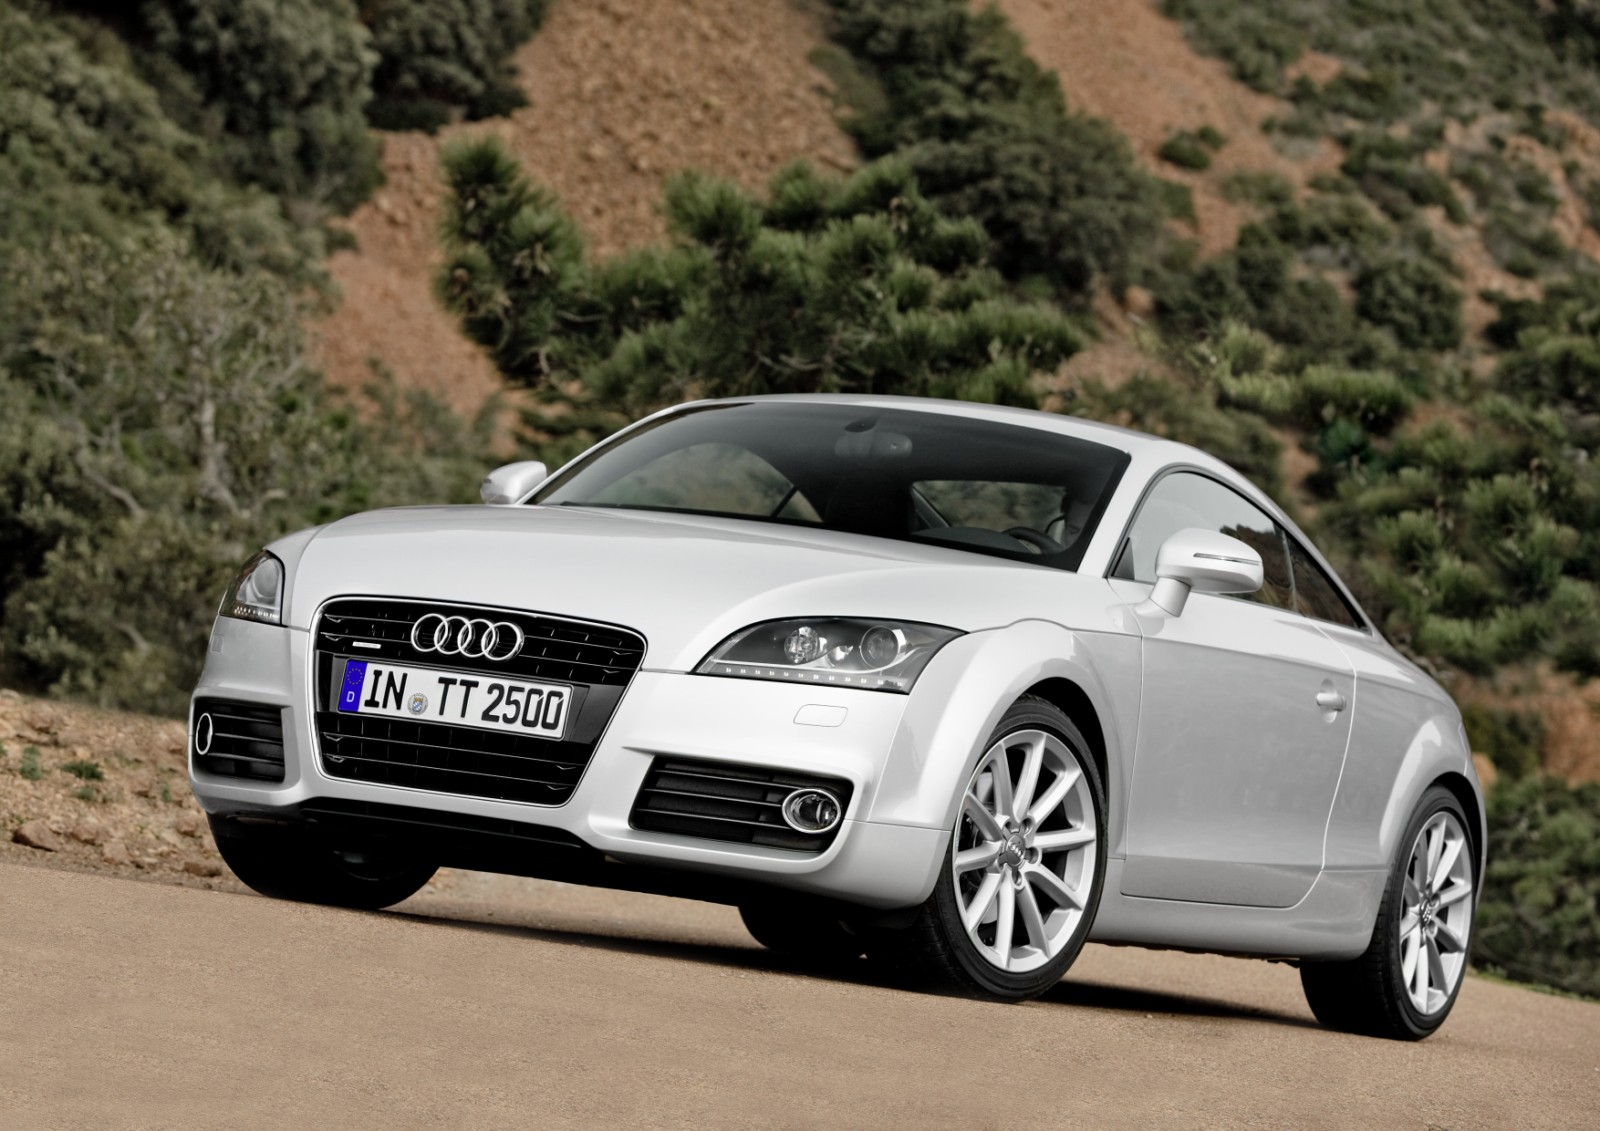 2011 Audi TT Review, Ratings, Specs, Prices, and Photos - The Car Connection